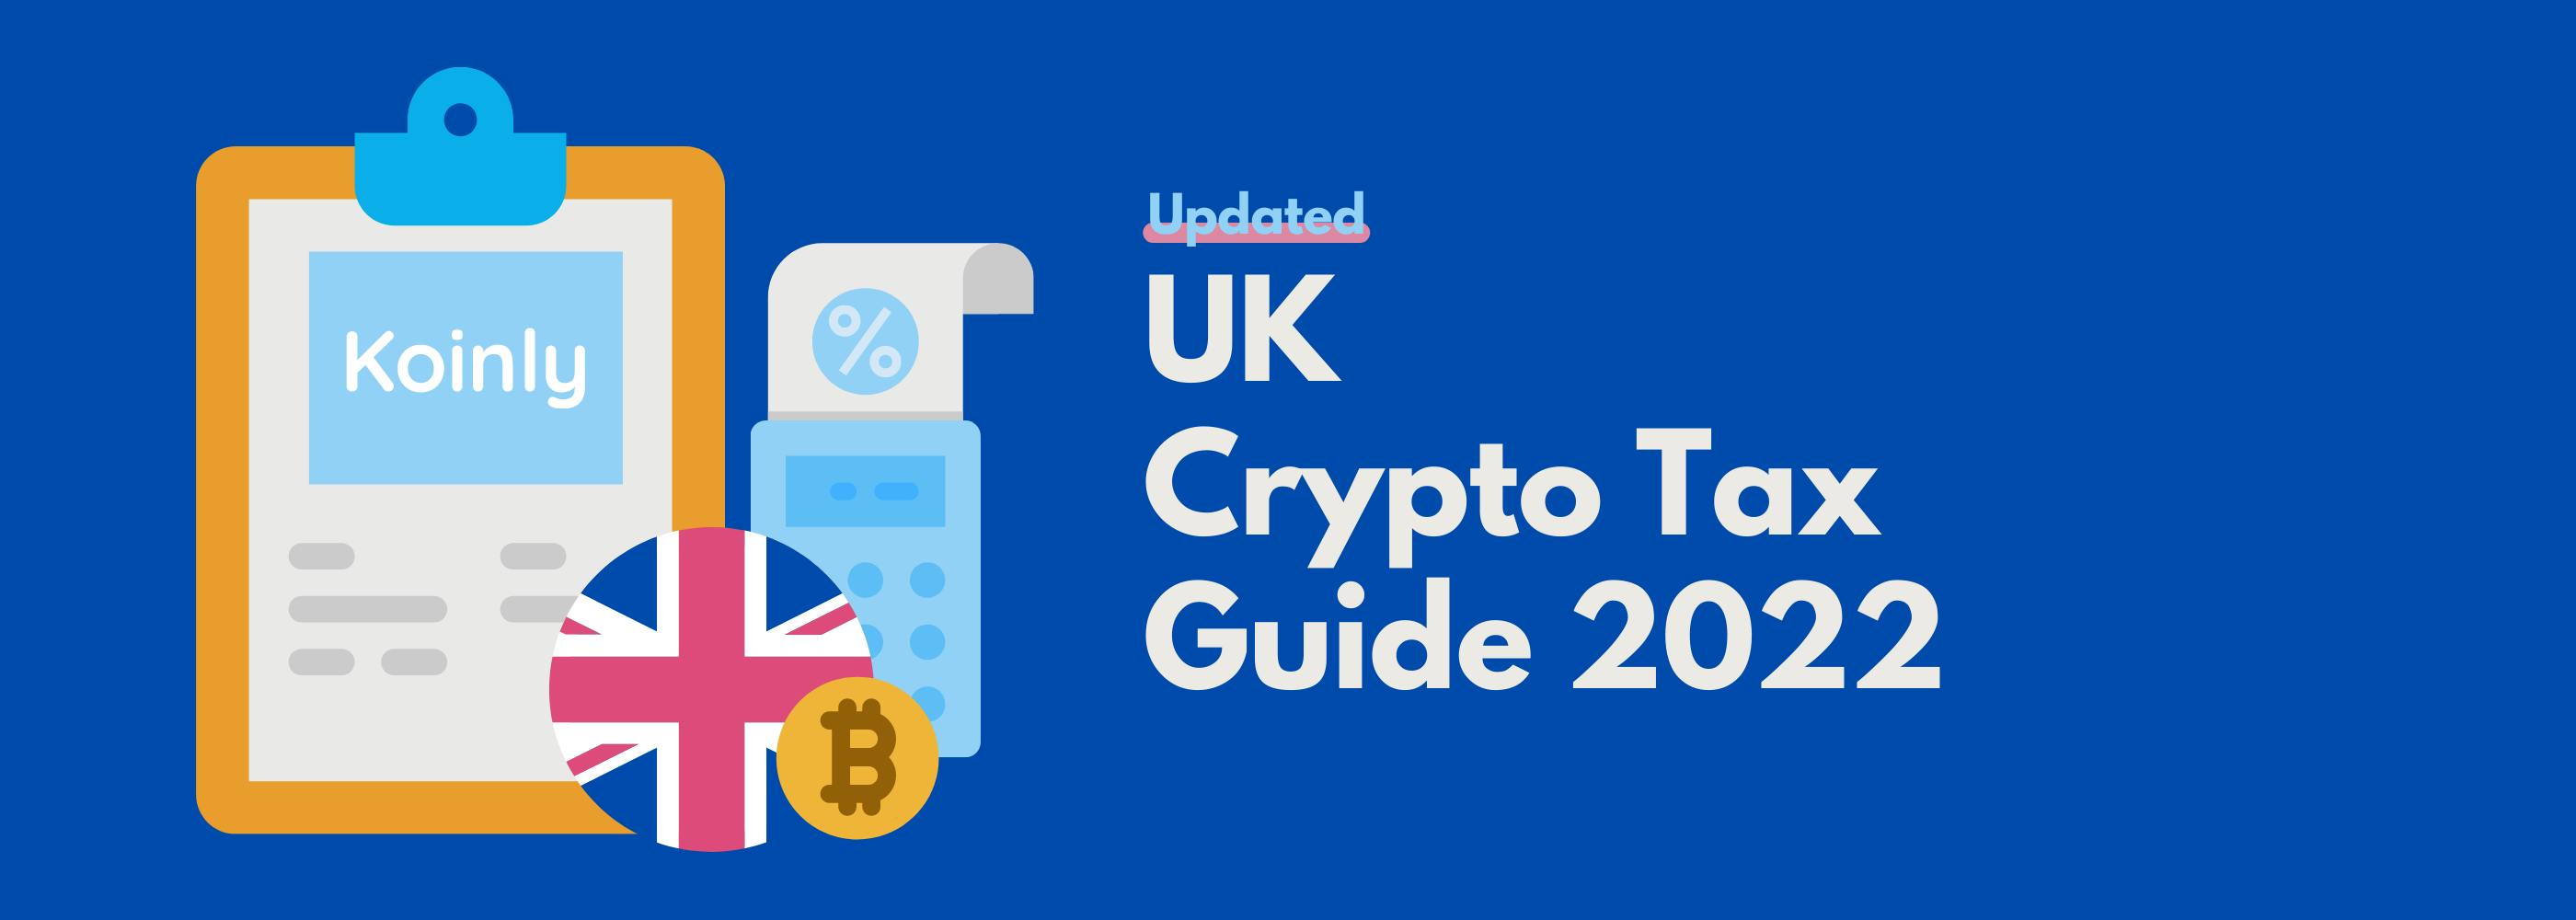 Koinly UK crypto tax guide